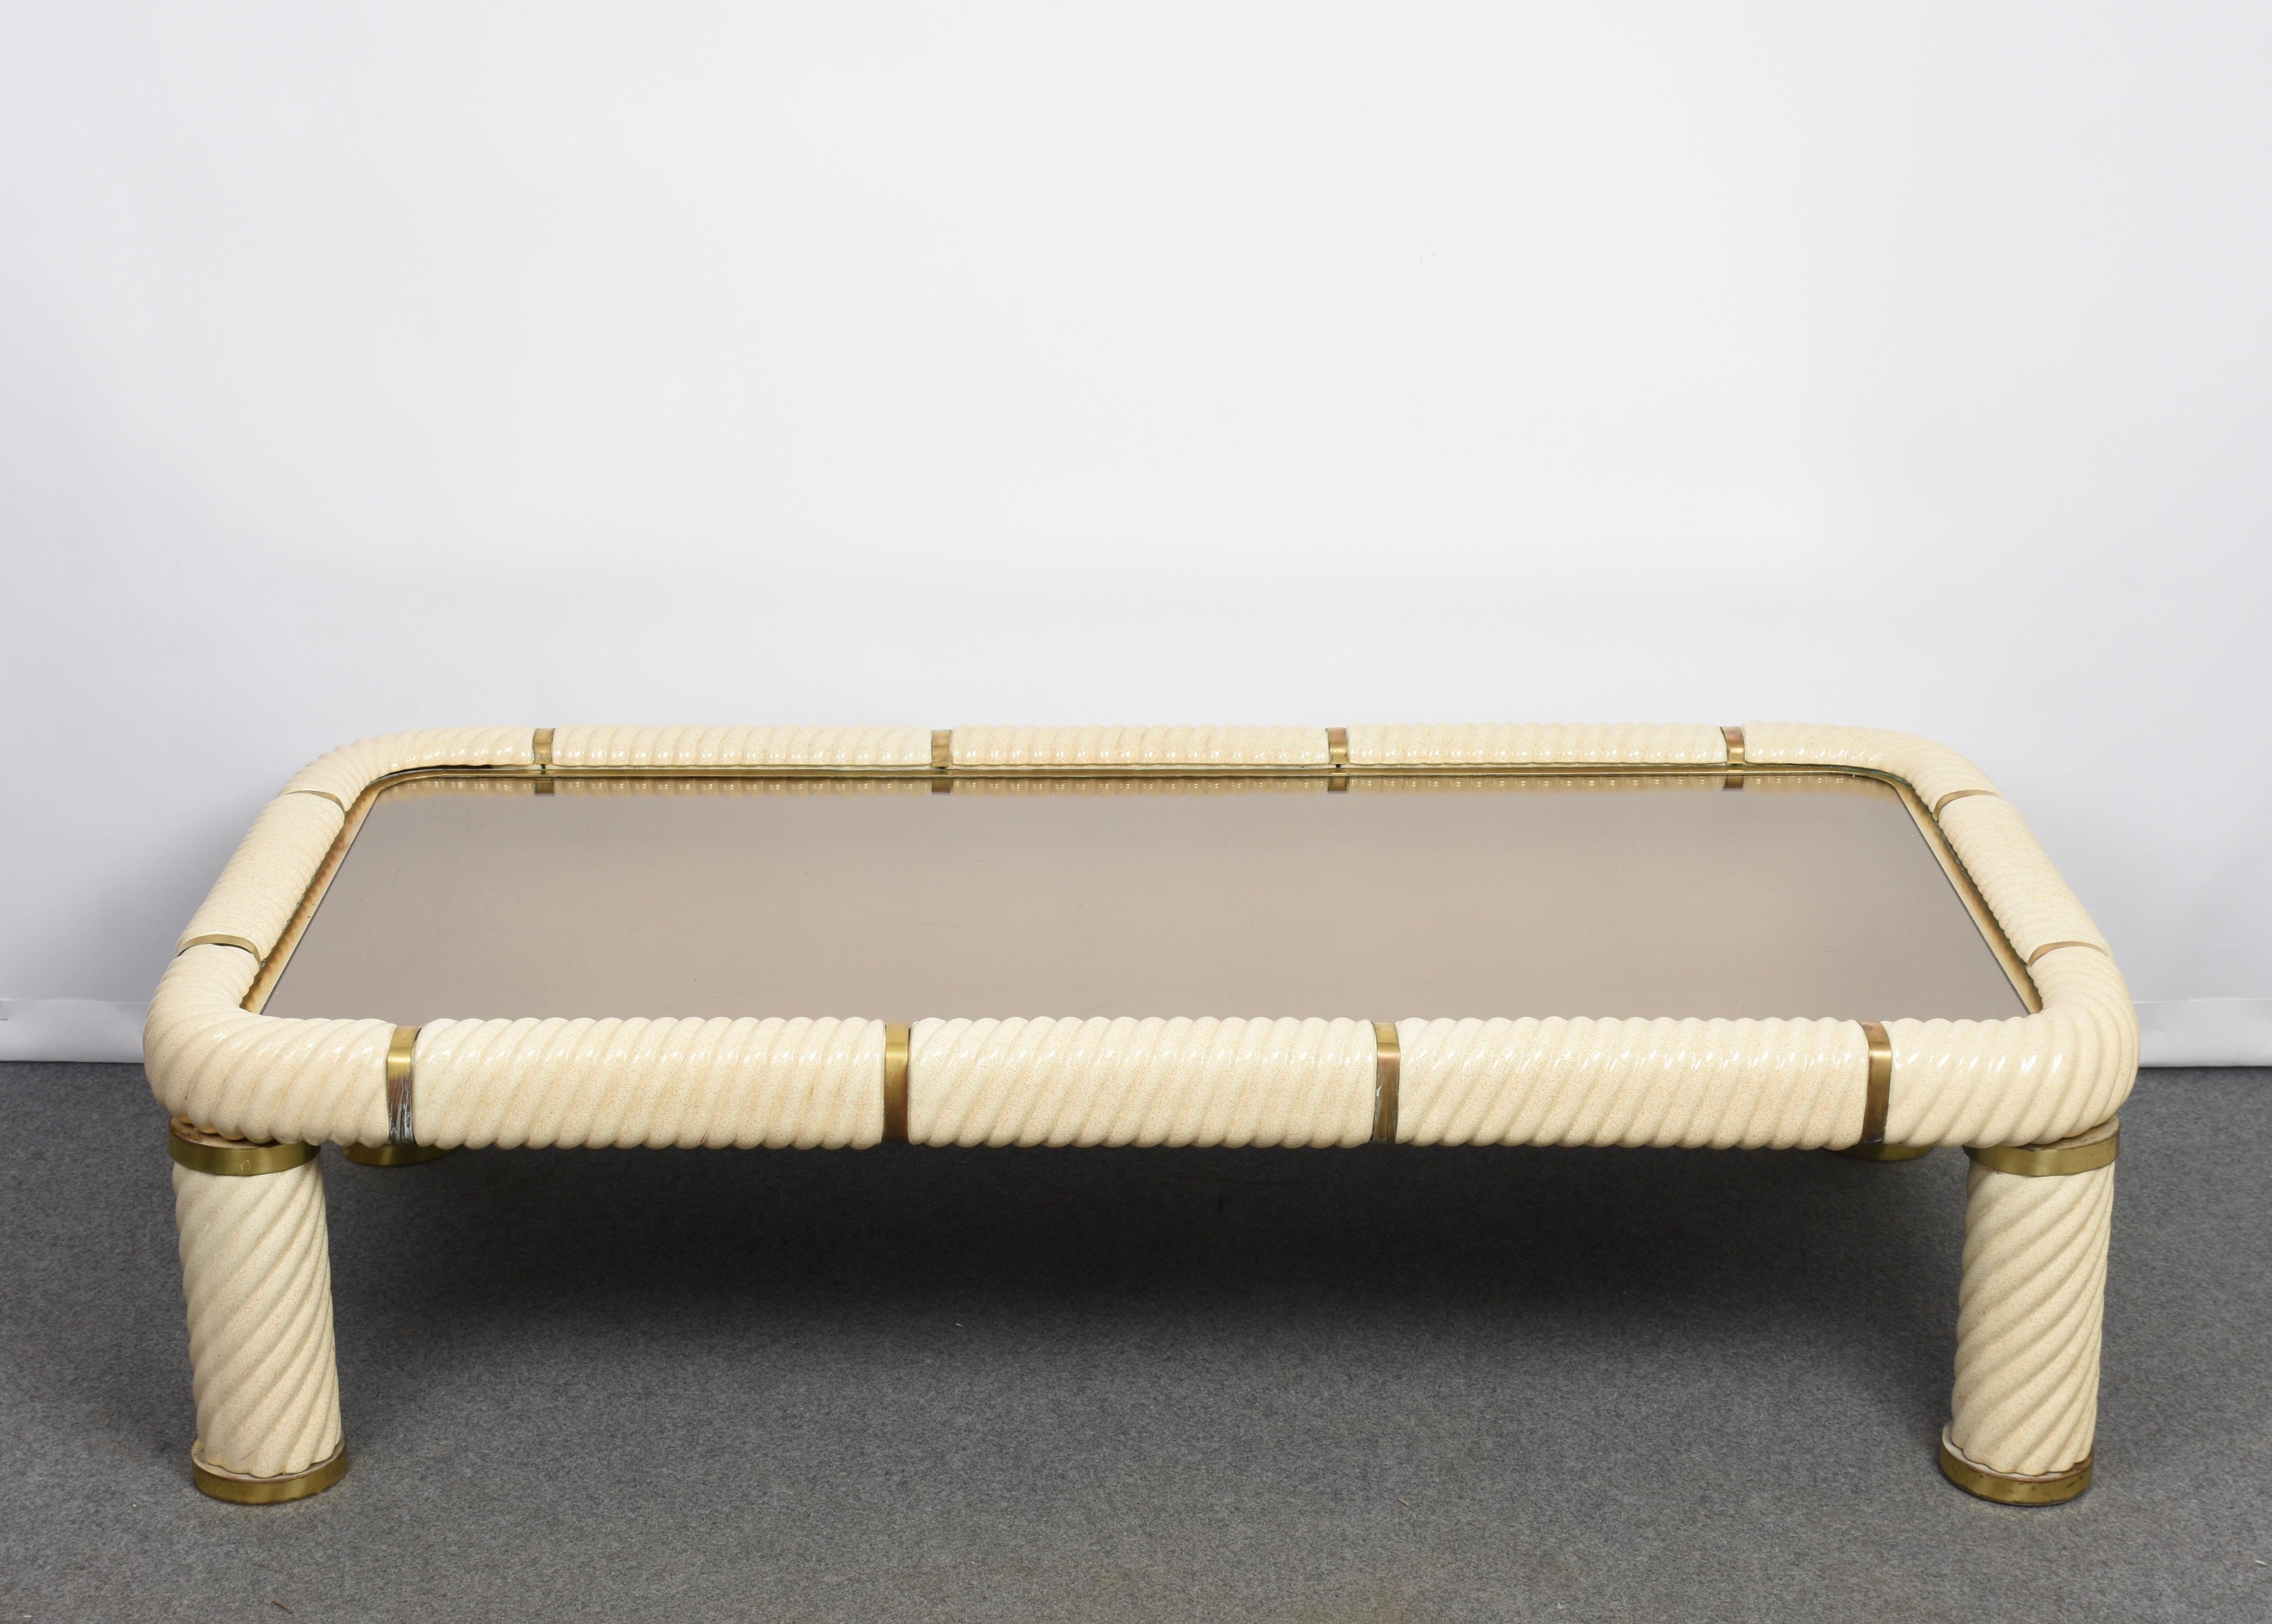 Amazing midcentury Hollywood Regency style ceramic brass and mirrored glass coffee table. This wonderful item was designed in Italy during the 1970s and designed by Tommaso Barbi.

This remarkable piece features spiral-form ceramic porcelain